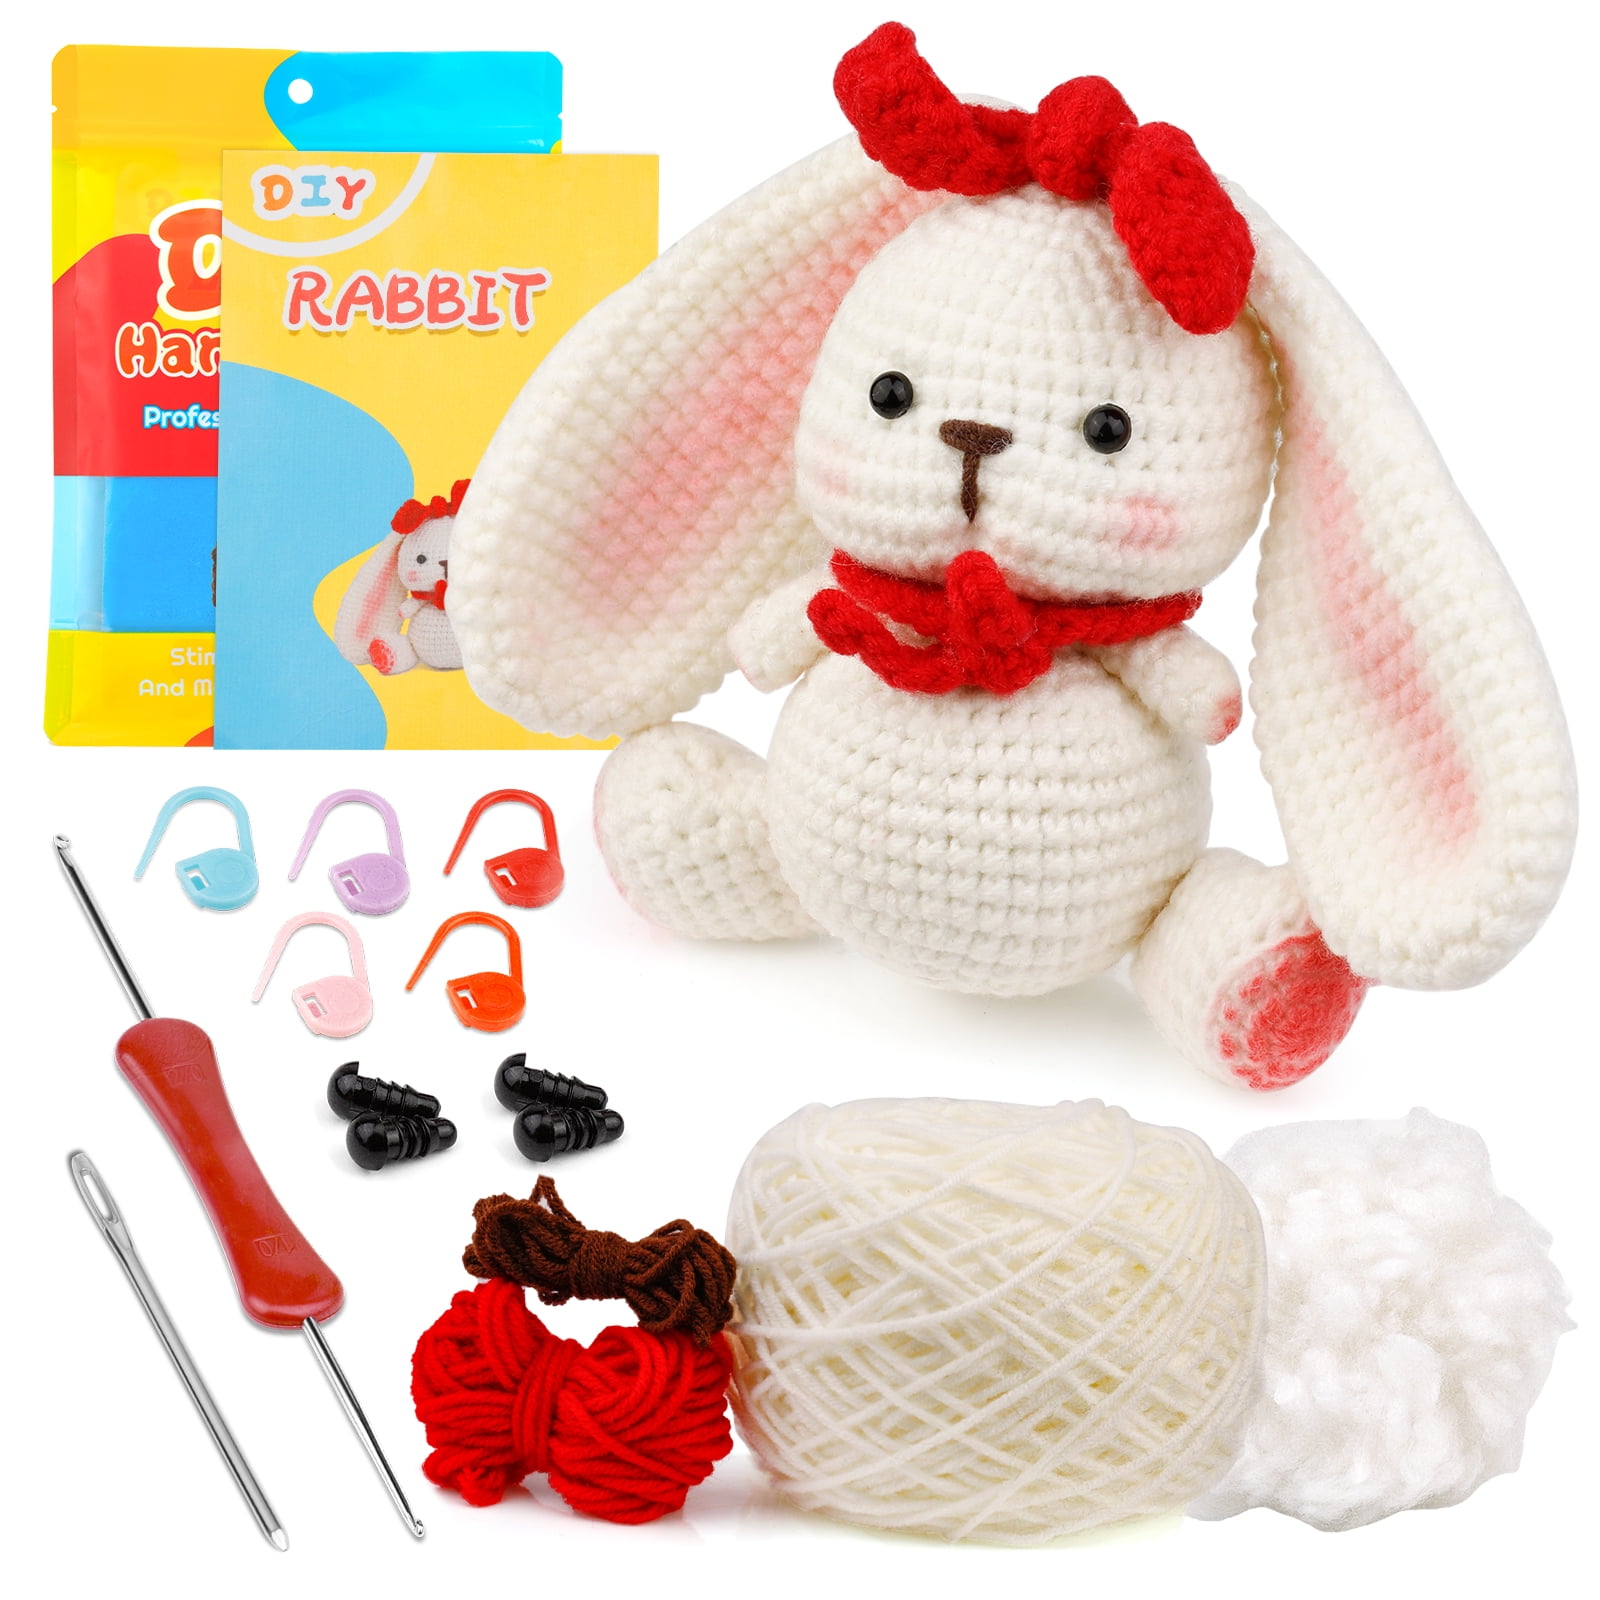  Yizzvb Crochet Kit for Beginners, 6 Pcs Flowers Knitting Kit  for Beginners Adults, Knitting Starter Kit with Step-by-Step Instructions  and Video Tutorials, Easy Crochet Kit for Beginners